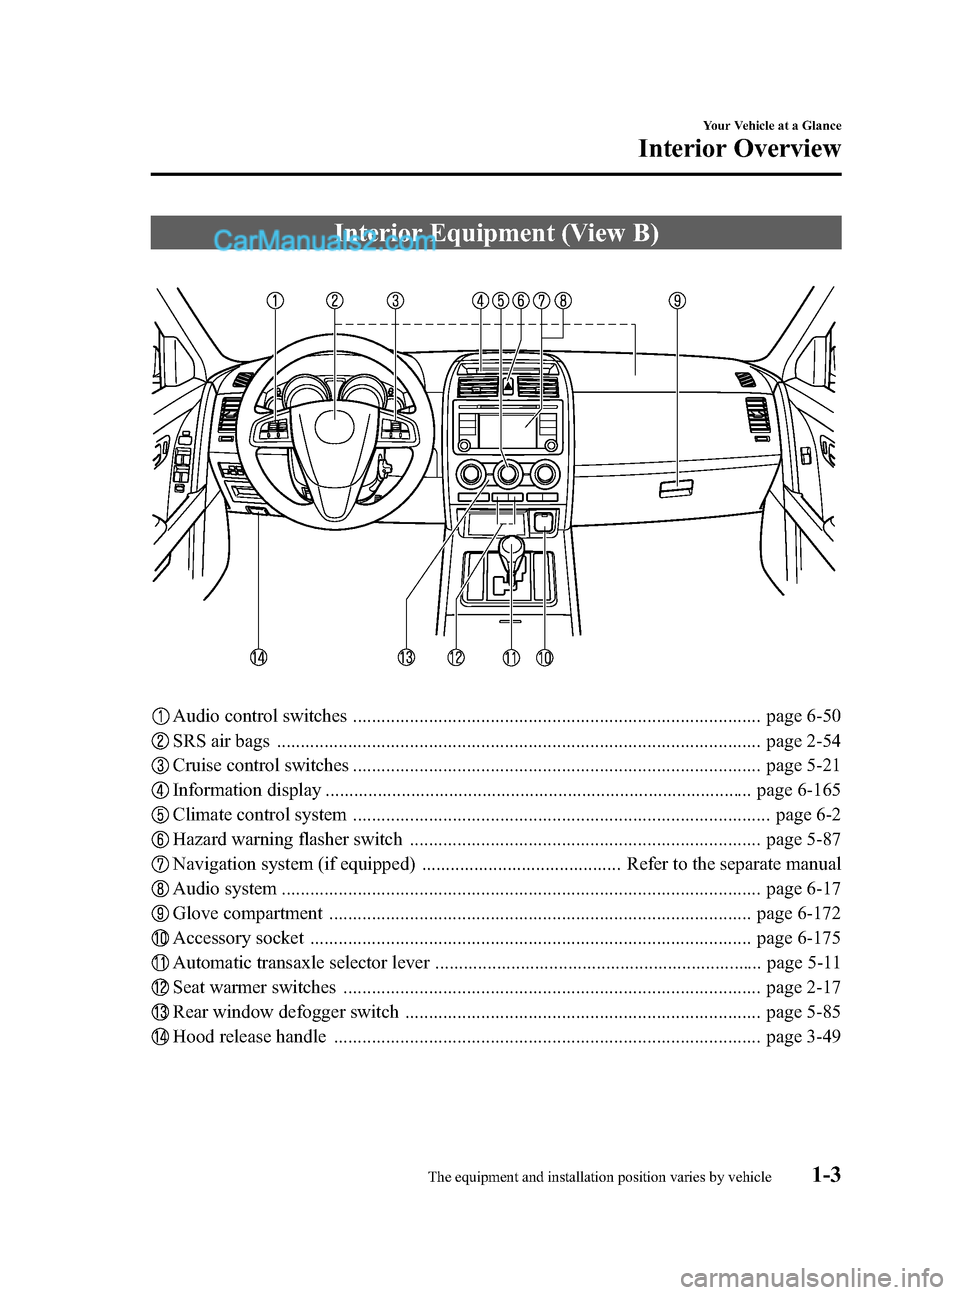 MAZDA MODEL CX-9 2015  Owners Manual (in English) Black plate (9,1)
Interior Equipment (View B)
Audio control switches ...................................................................................... page 6-50
SRS air bags .....................